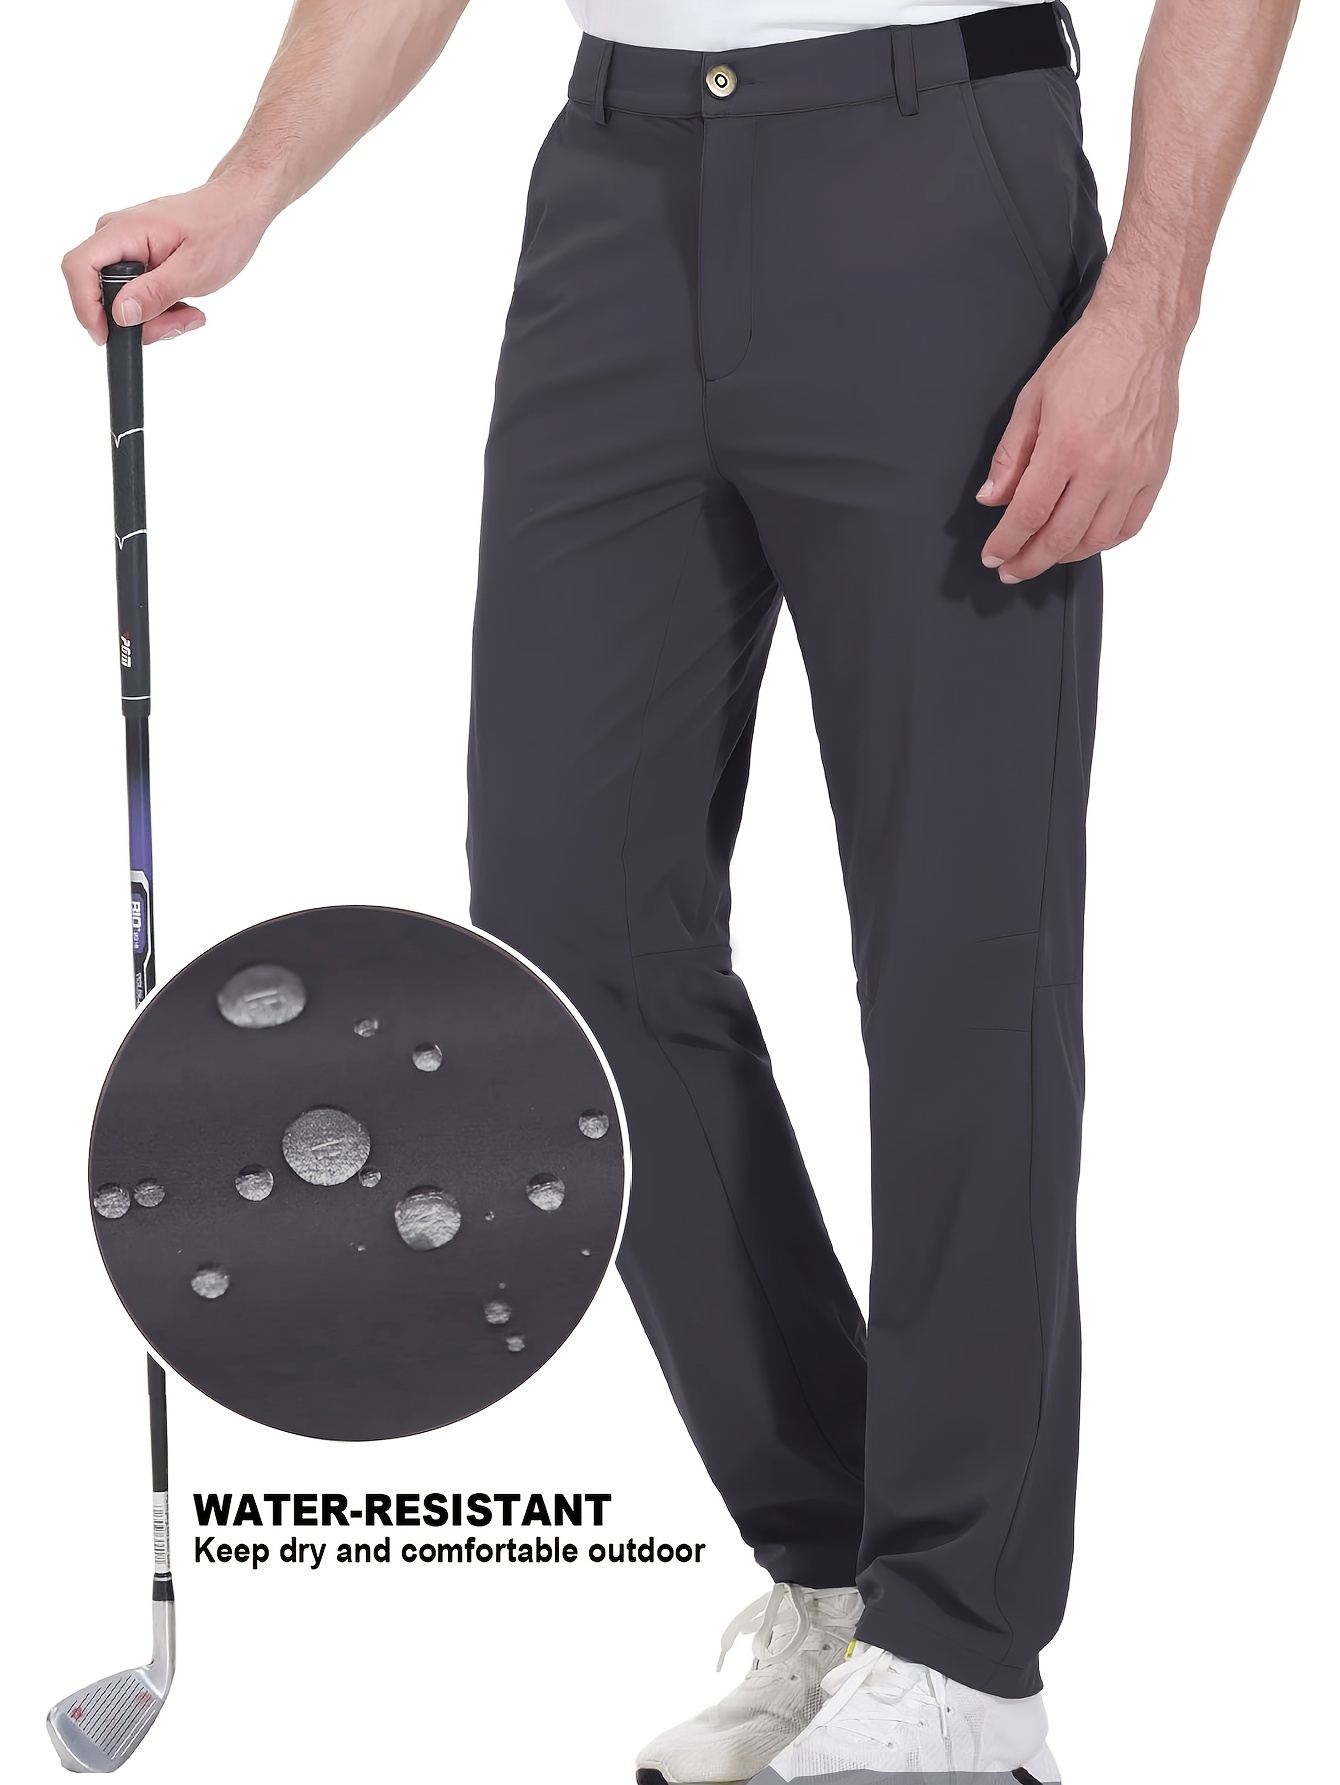 Are $17 Golf Pants Any Good?